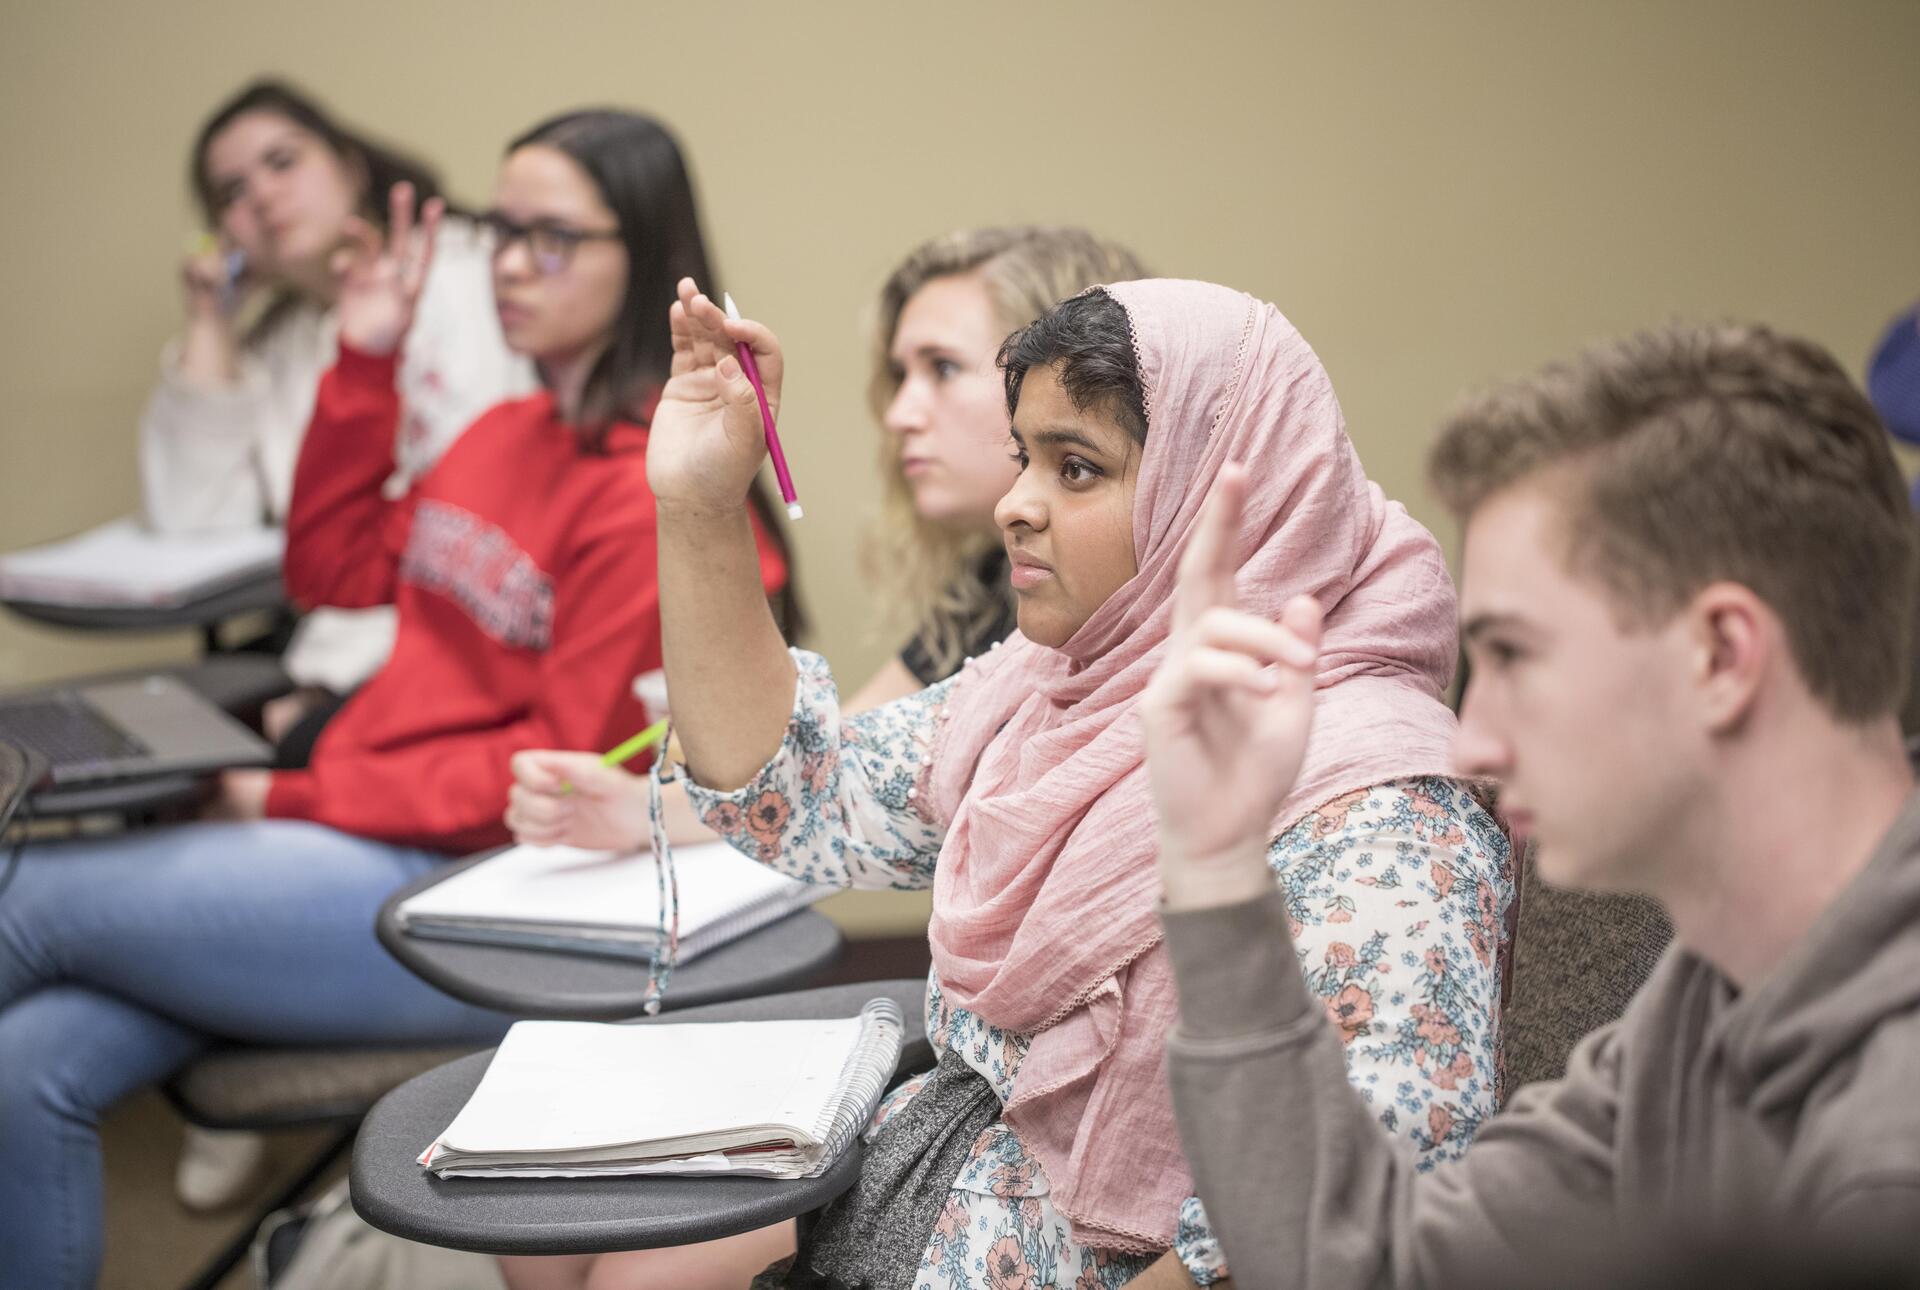 Five students are sitting at their desks, three with hands raised; the focus is on a young woman in a pink hijab